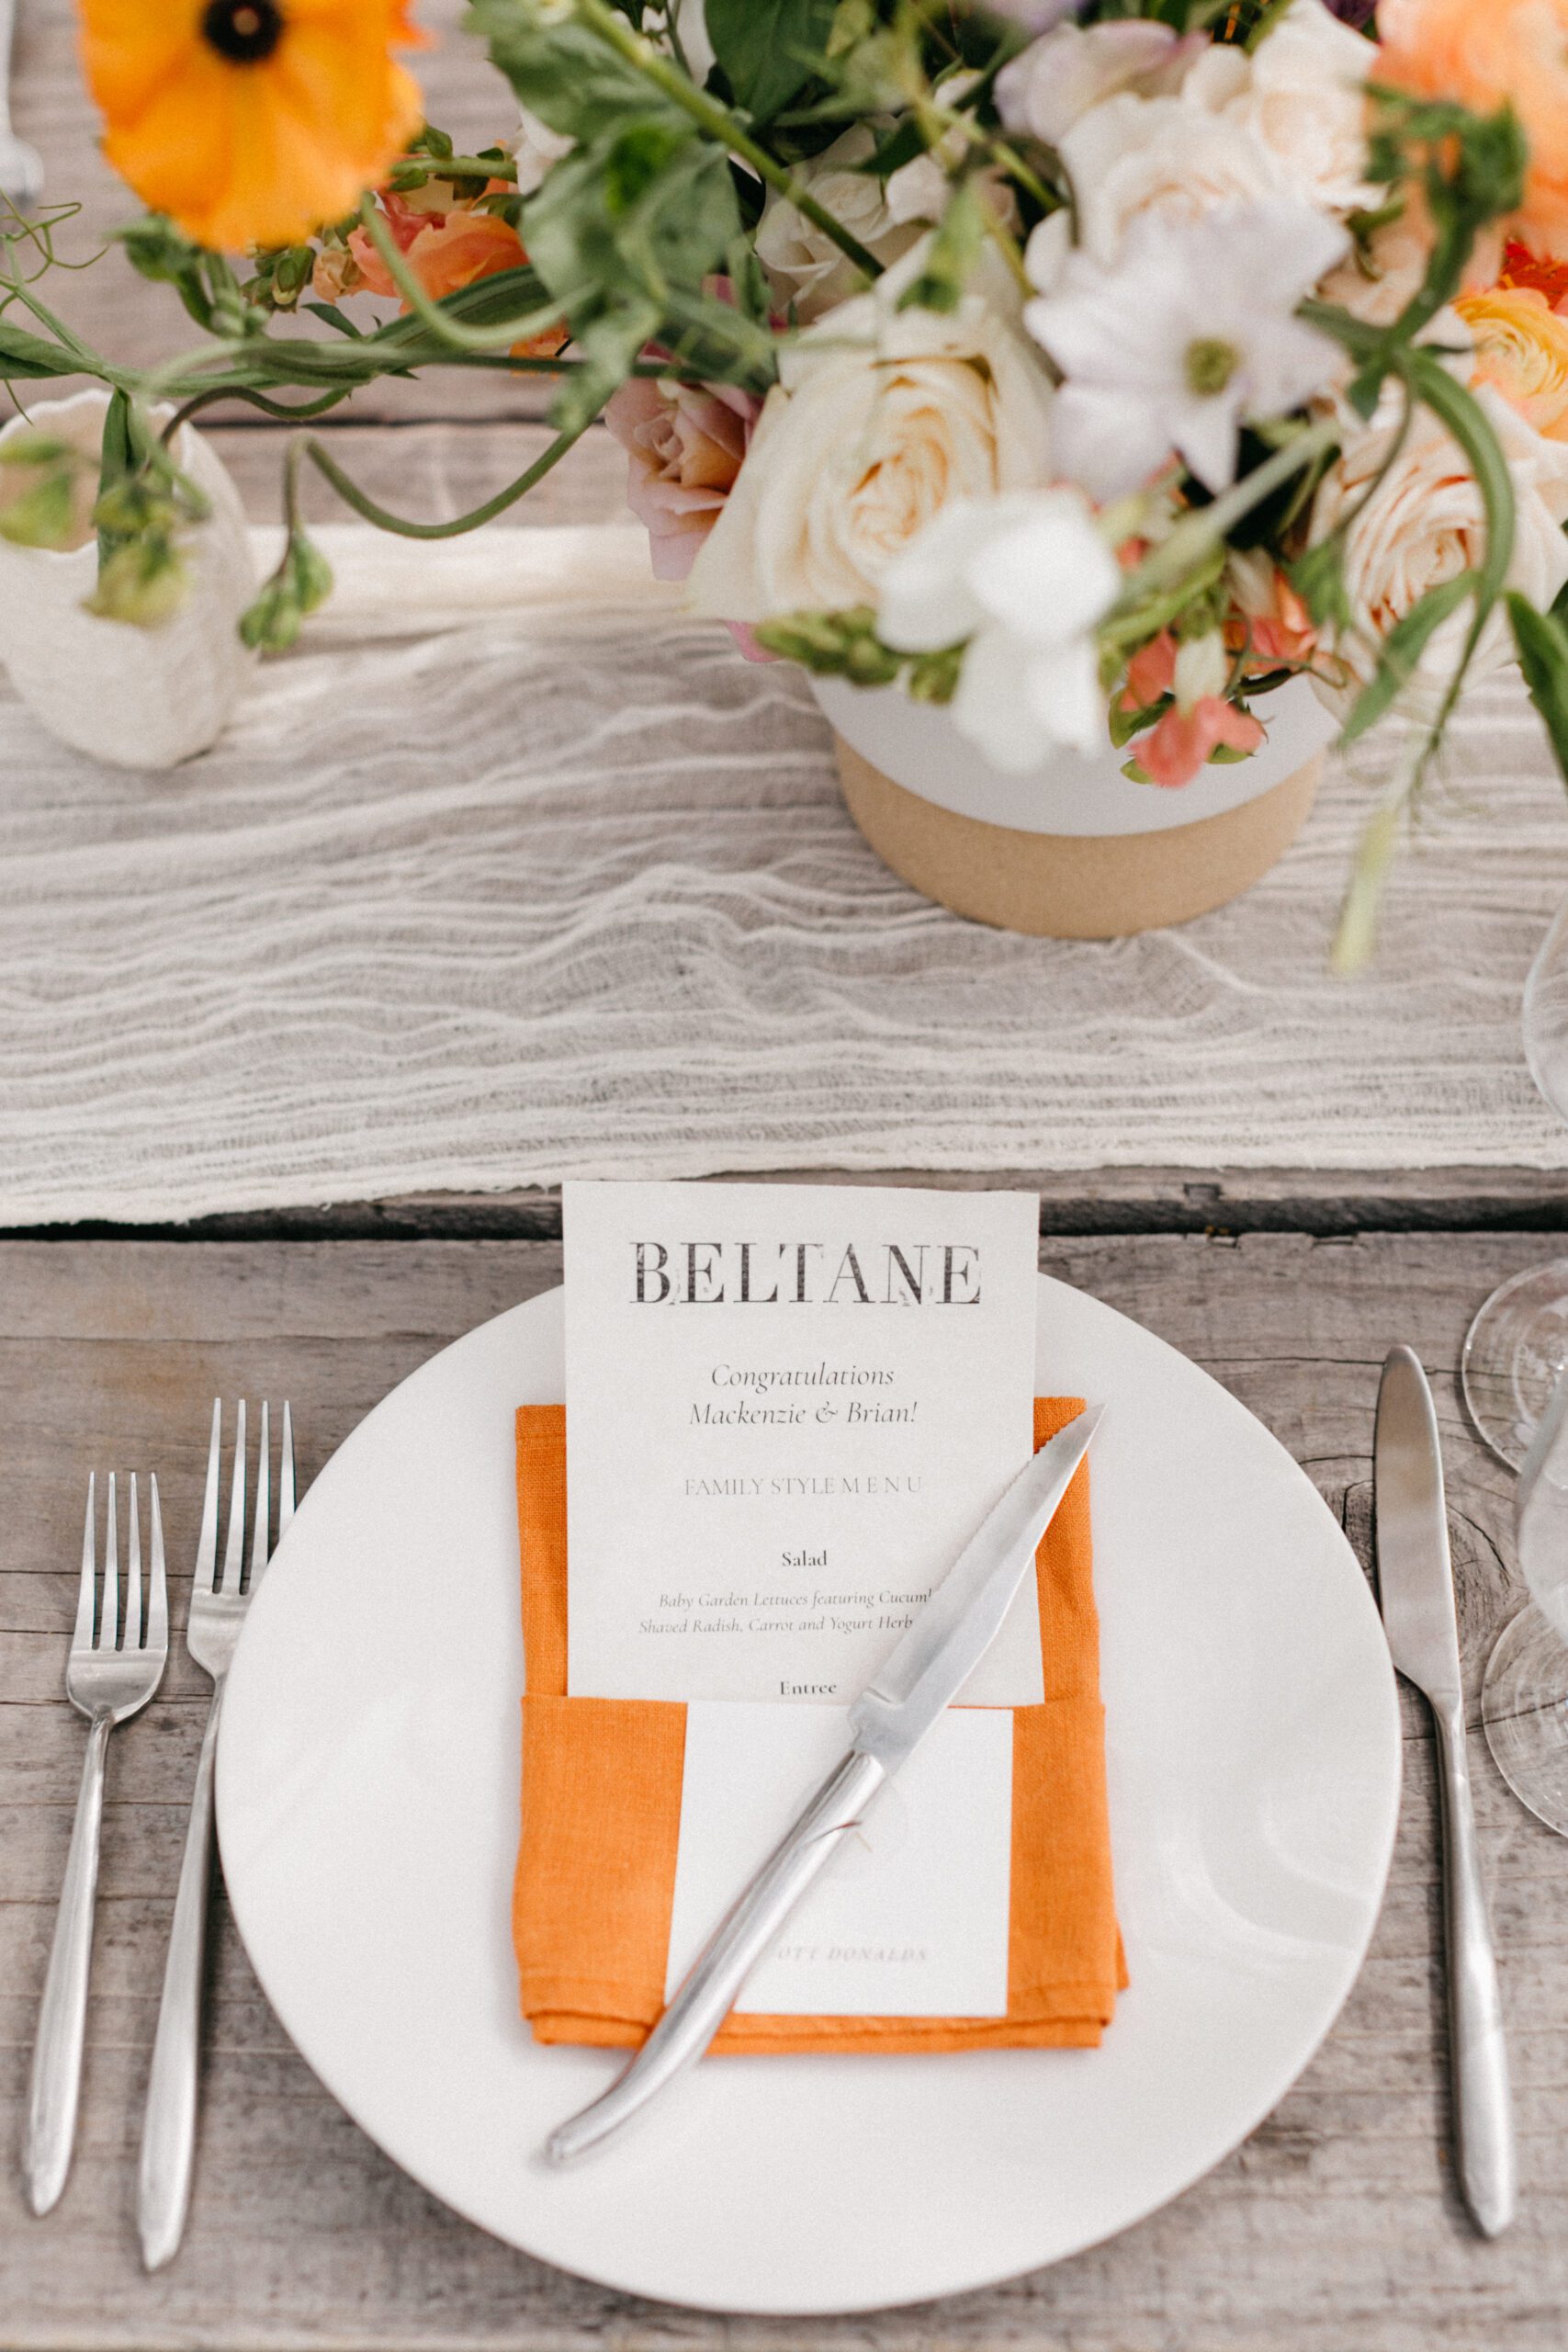 beltane ranch wedding, farm to table, family style menu, sustainable wedding food